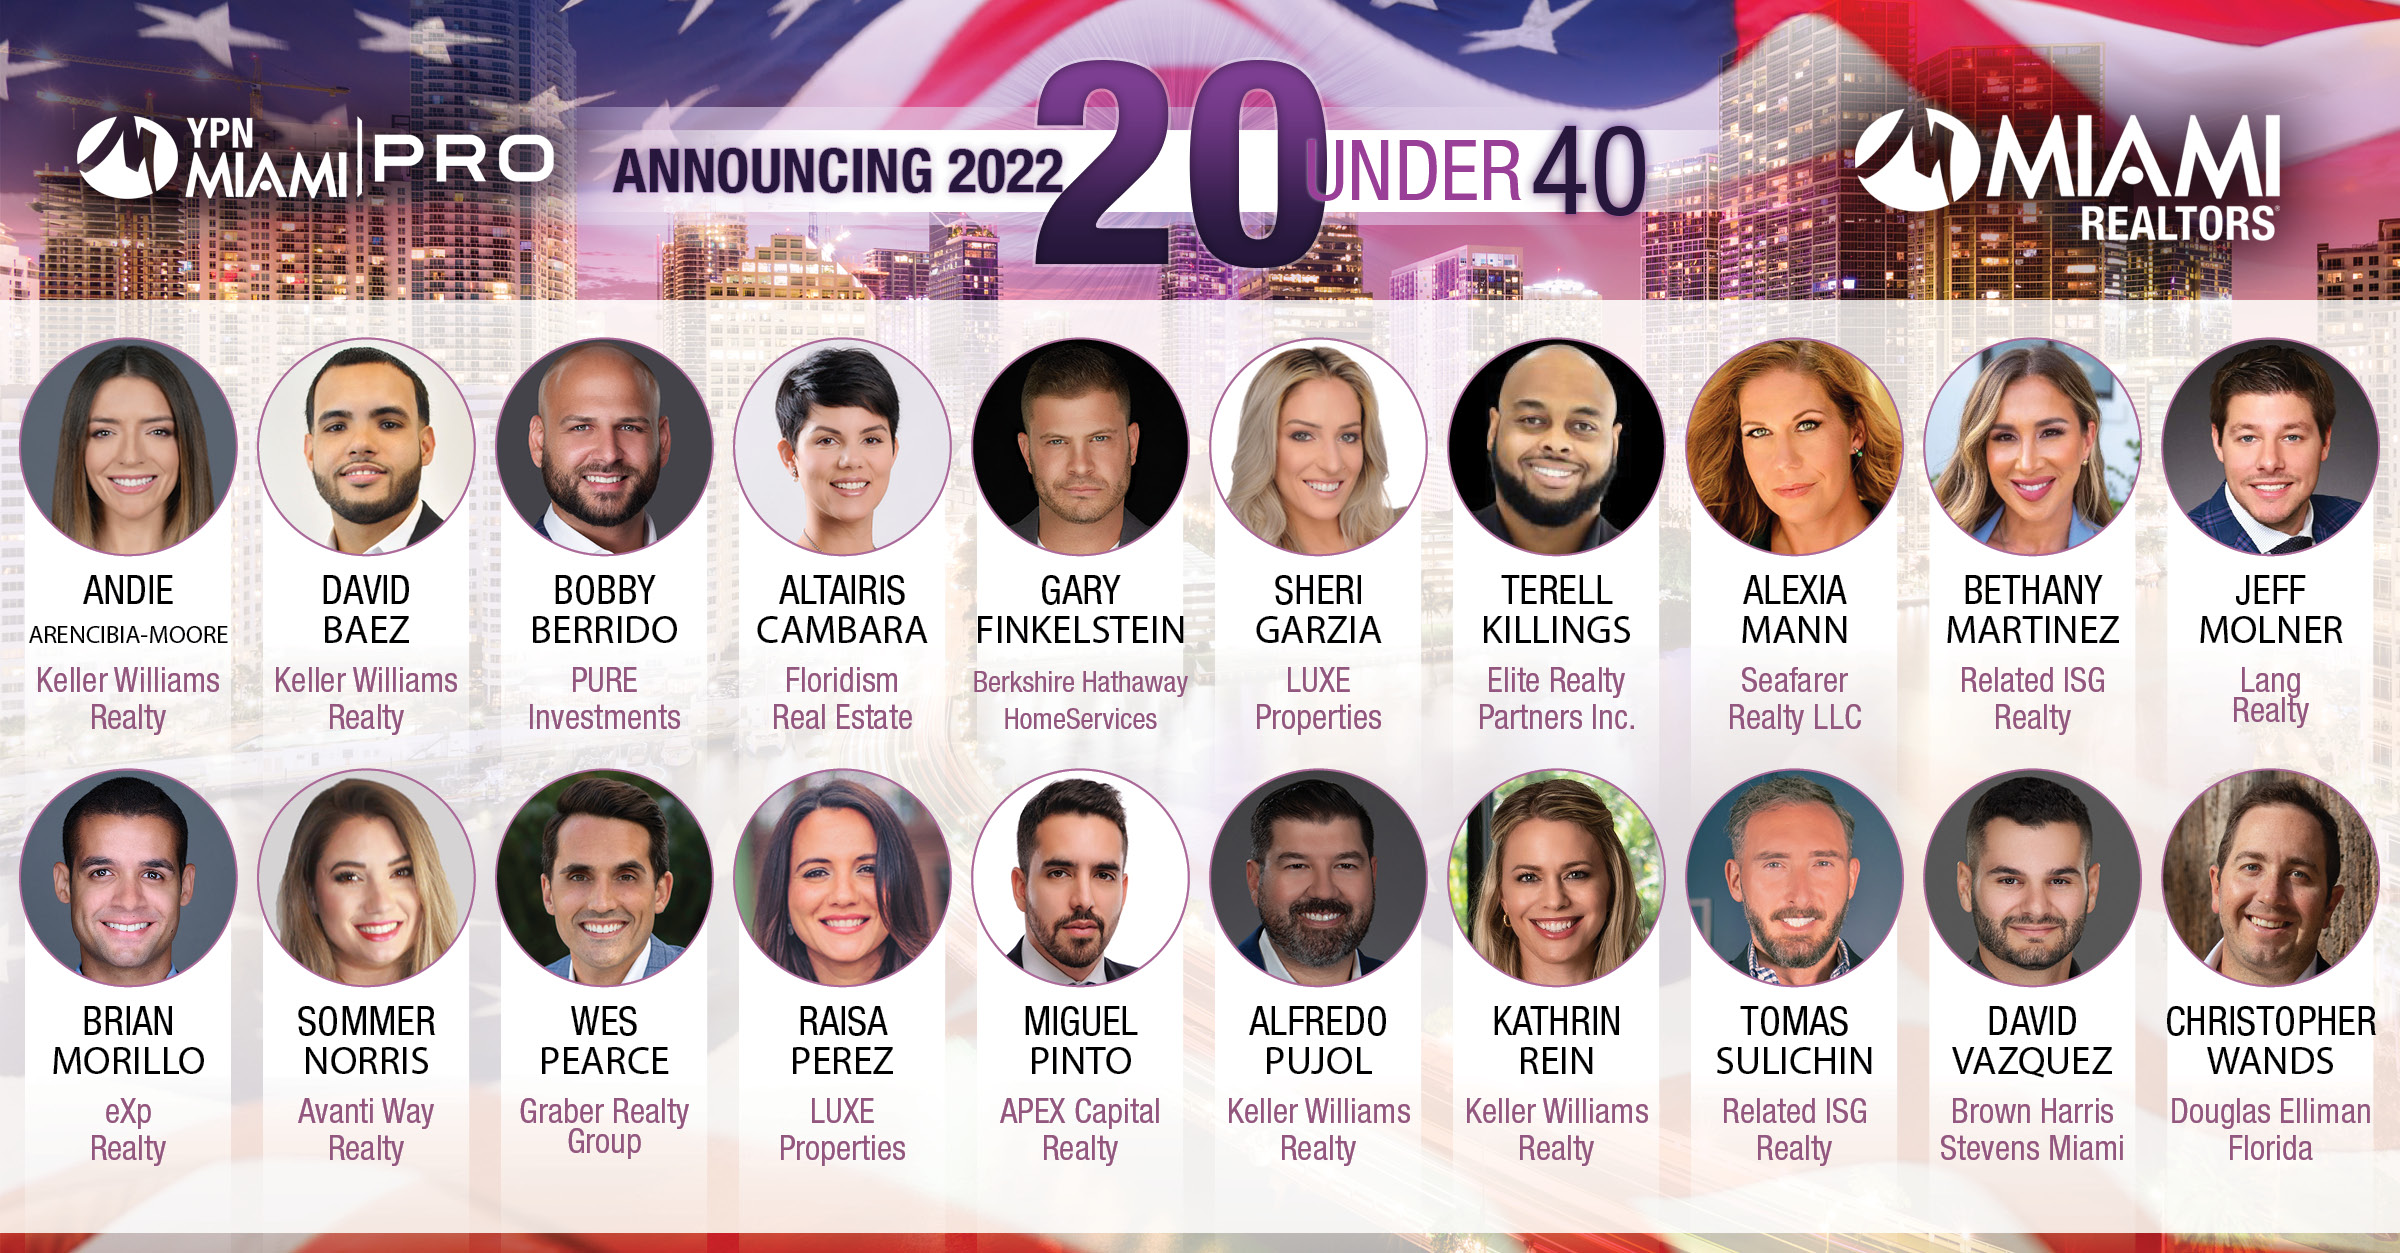 MIAMI Realtors® 20 Under 40 Awards Recognizes Young Realtors® Making a Difference